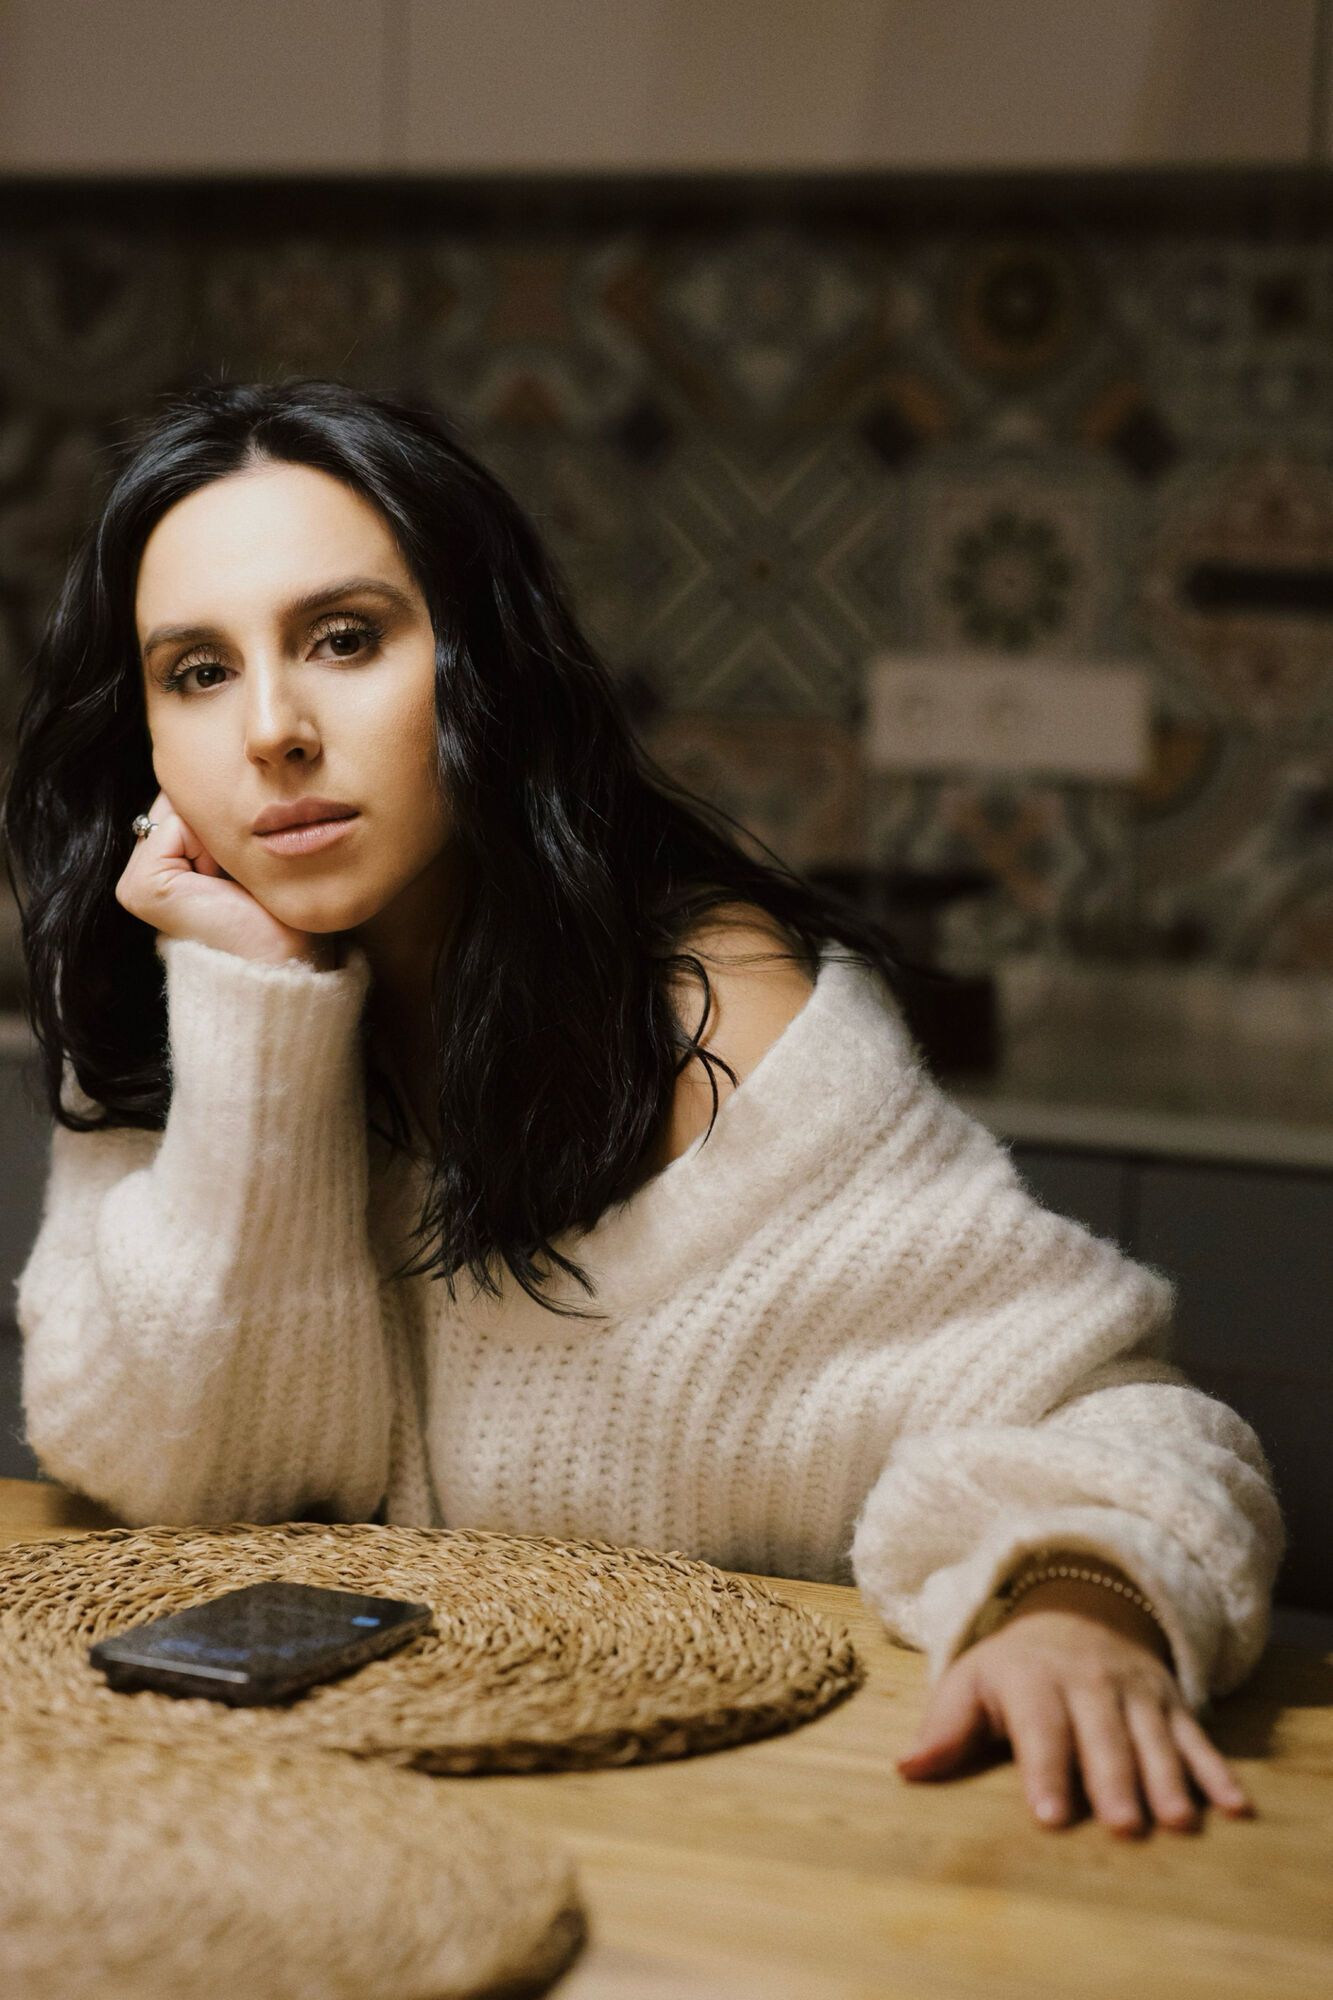 ''My Brother'': Jamala presented a new song, which she dedicated to a friend who died in the war